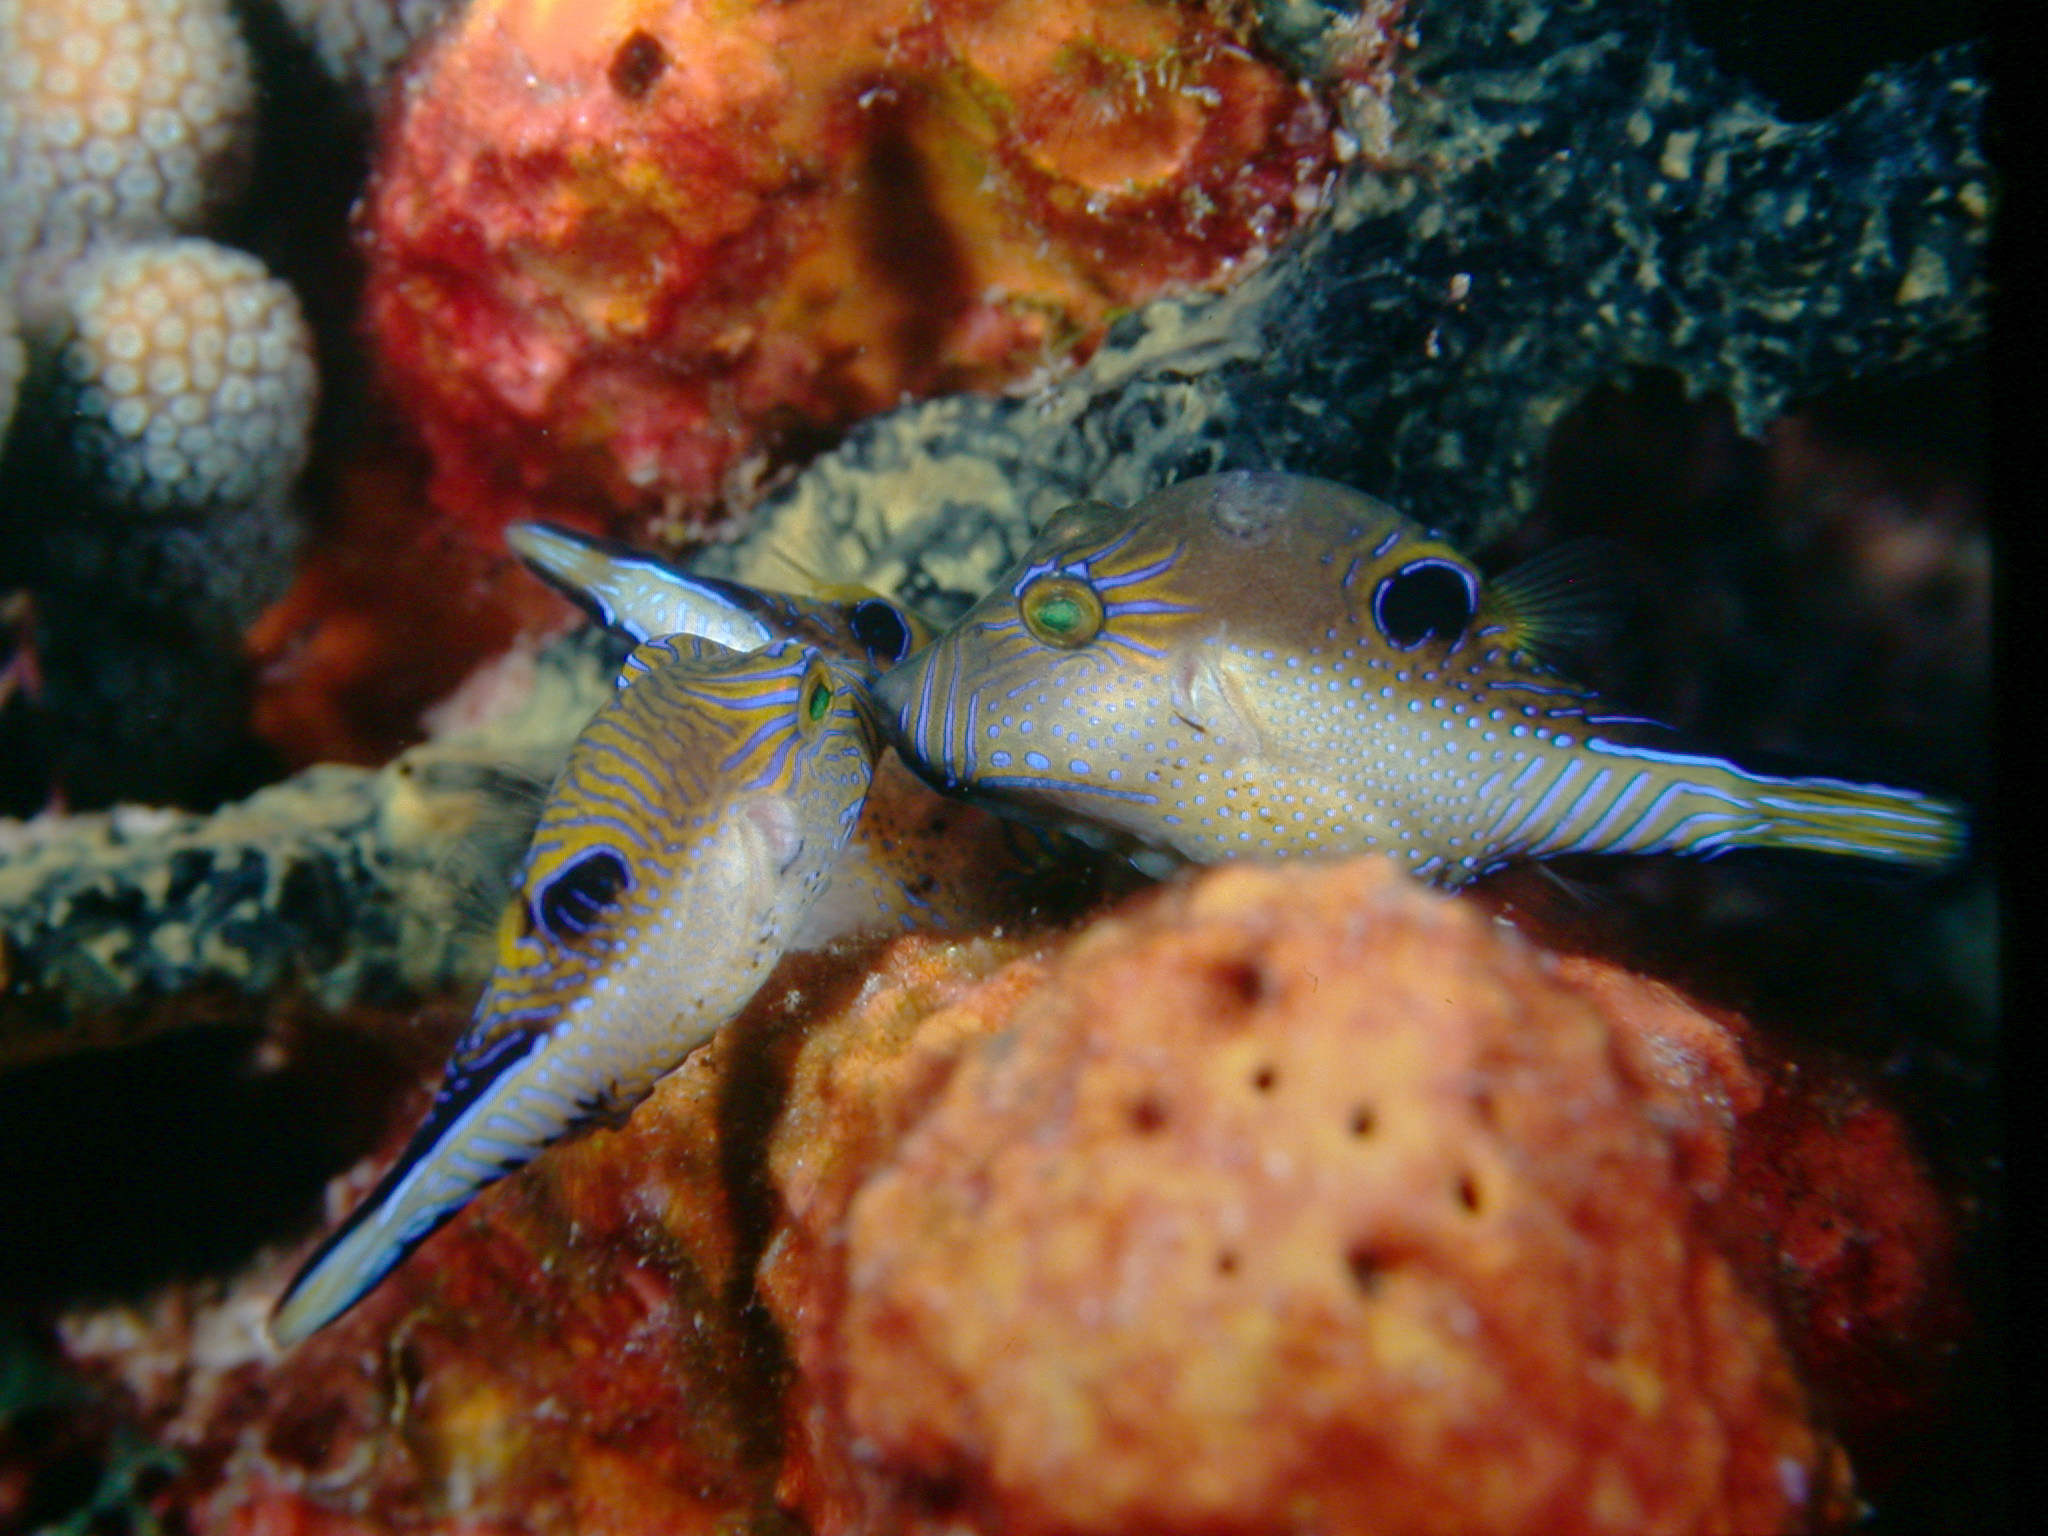 Two Caribbean sharp-nose puffers on a reef.